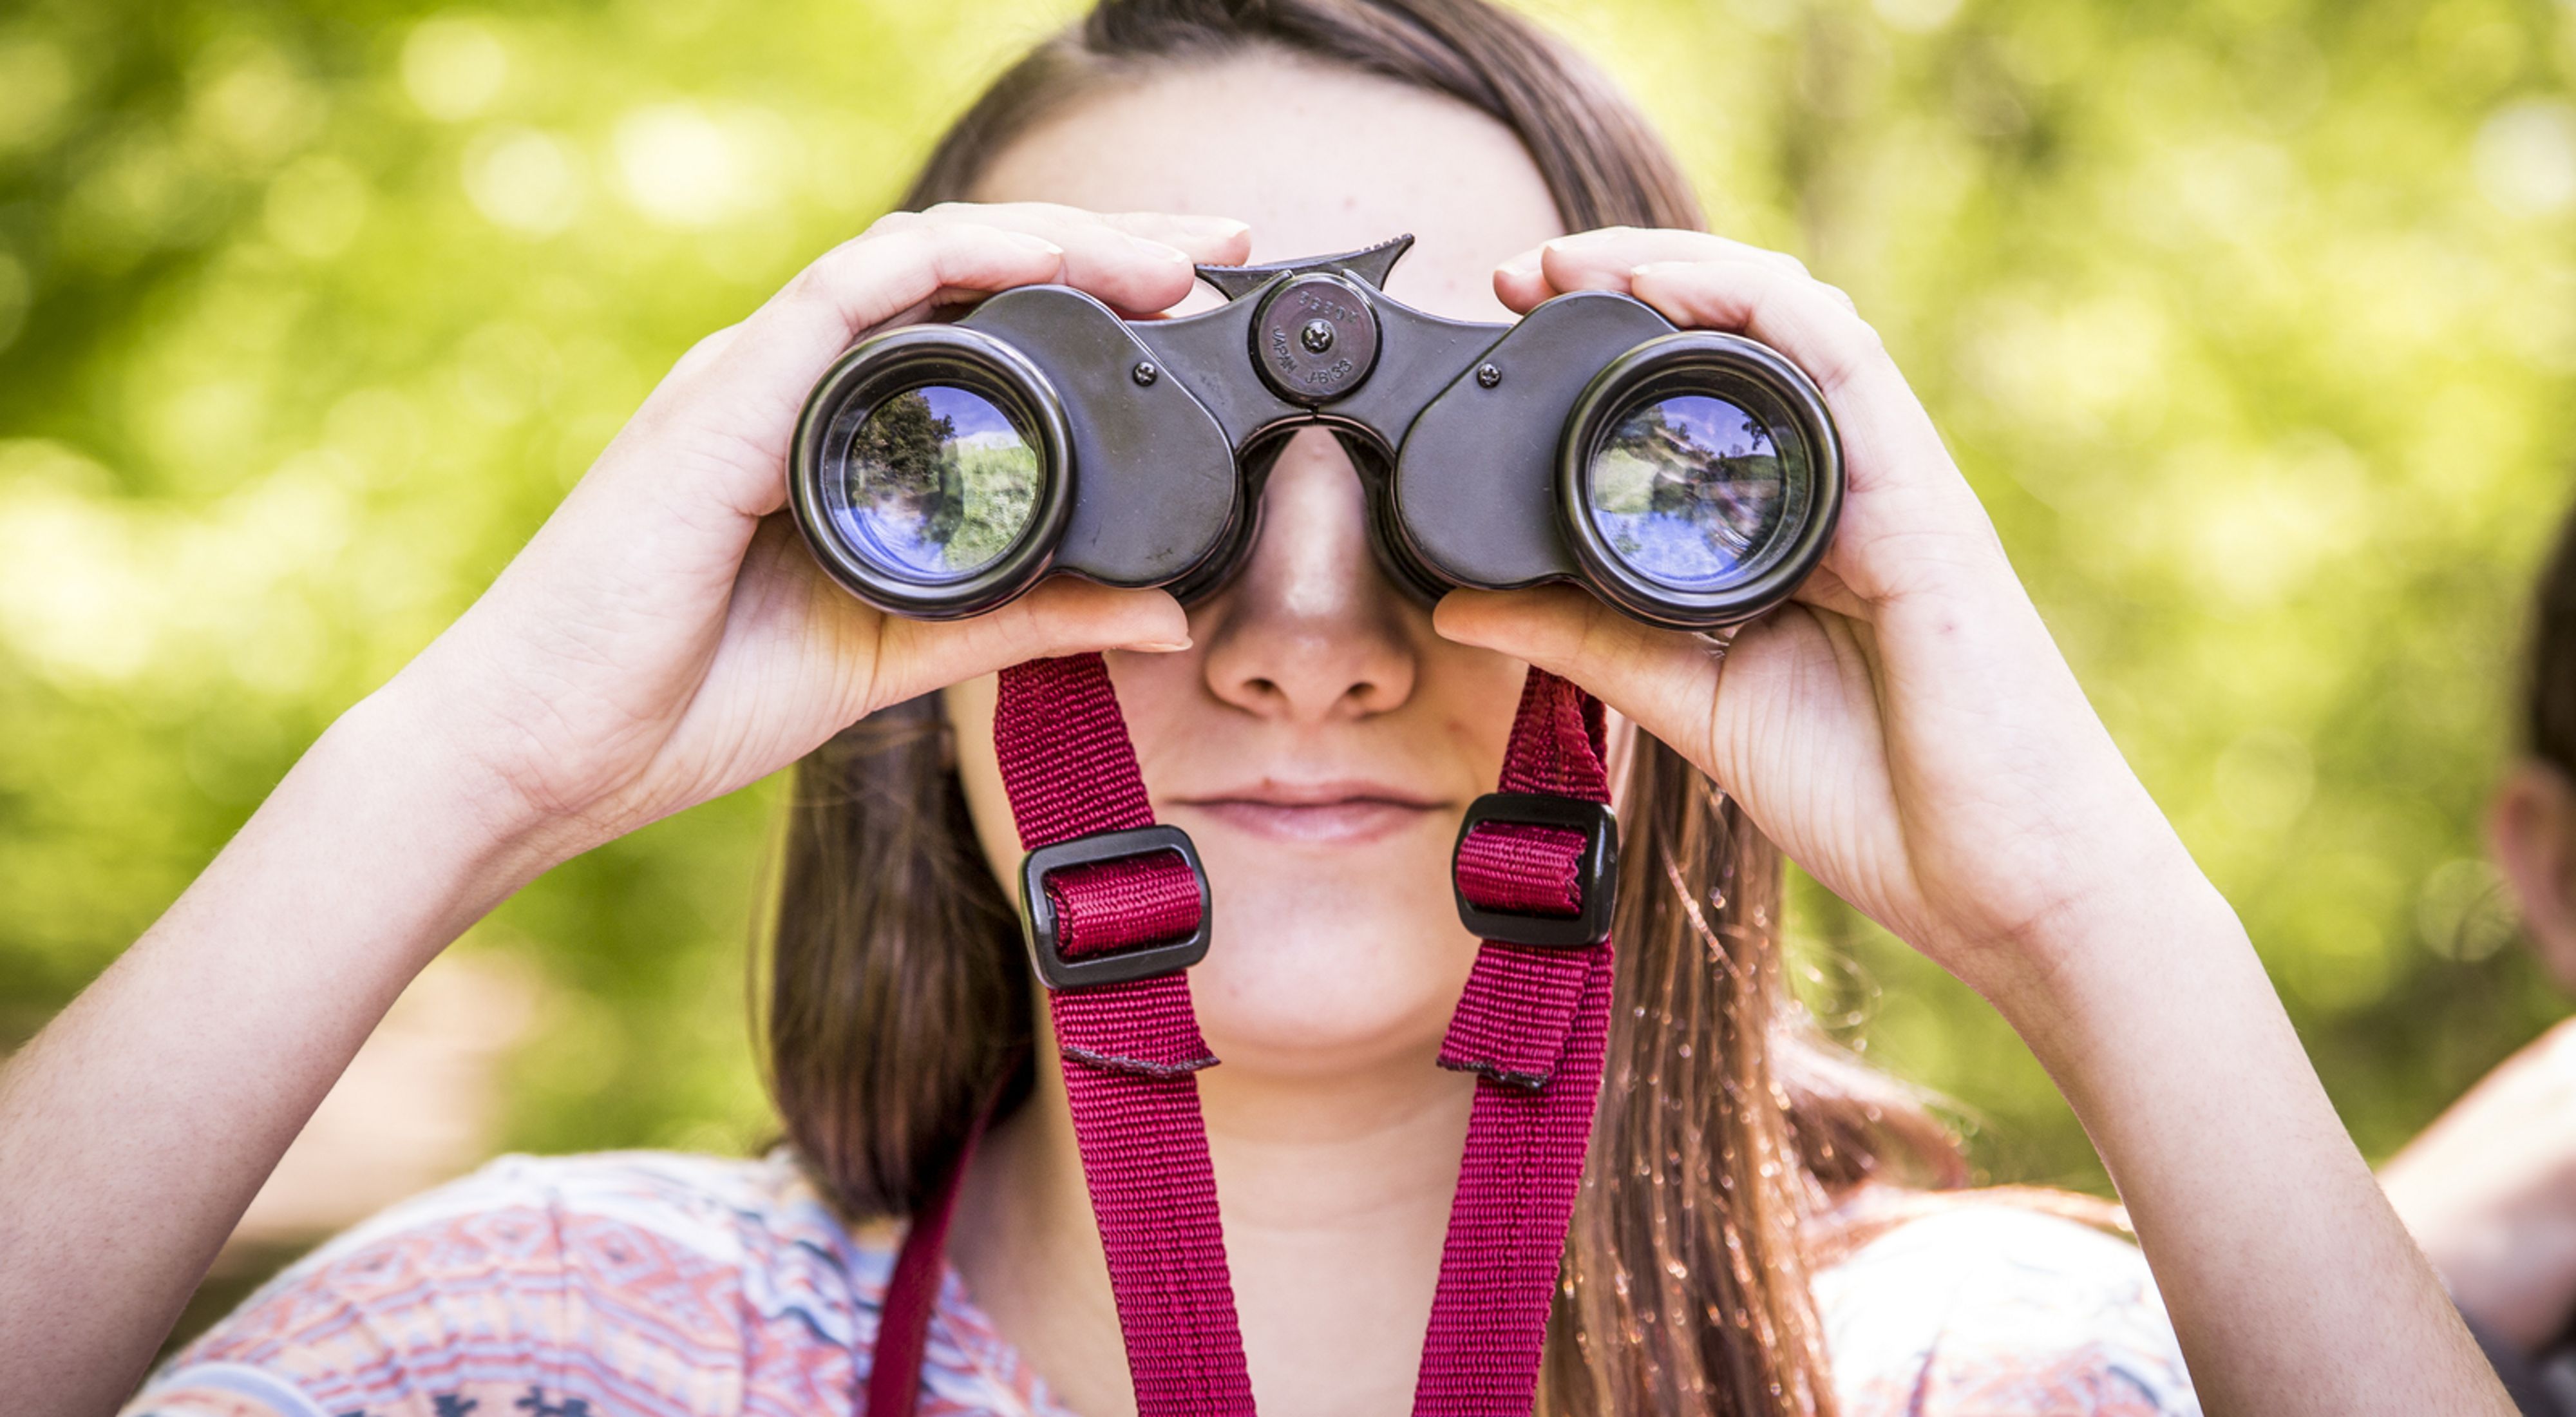 A close-up photo of a person looking at the camera through binoculars.